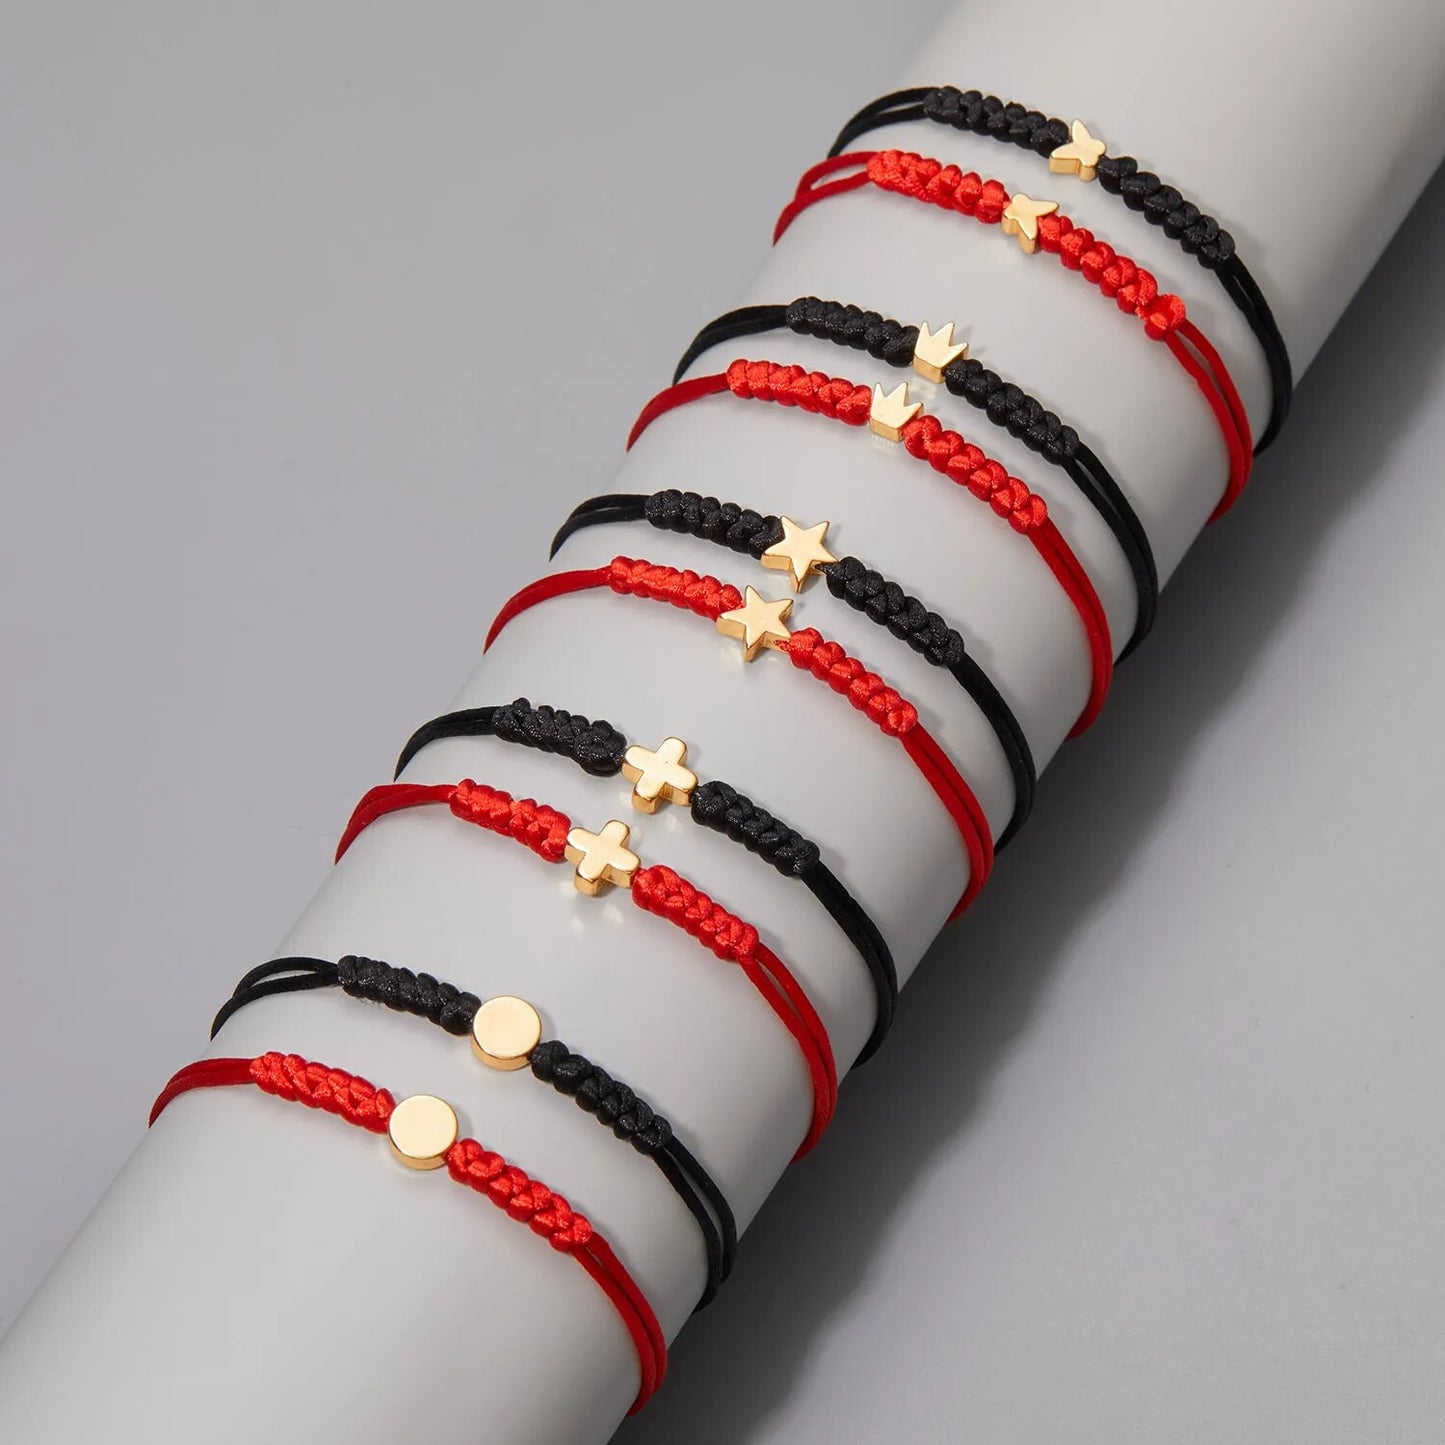 Red String of Fate Bracelets: Braided Red Black Rope, Long Distance, Protection & Couples Gift.